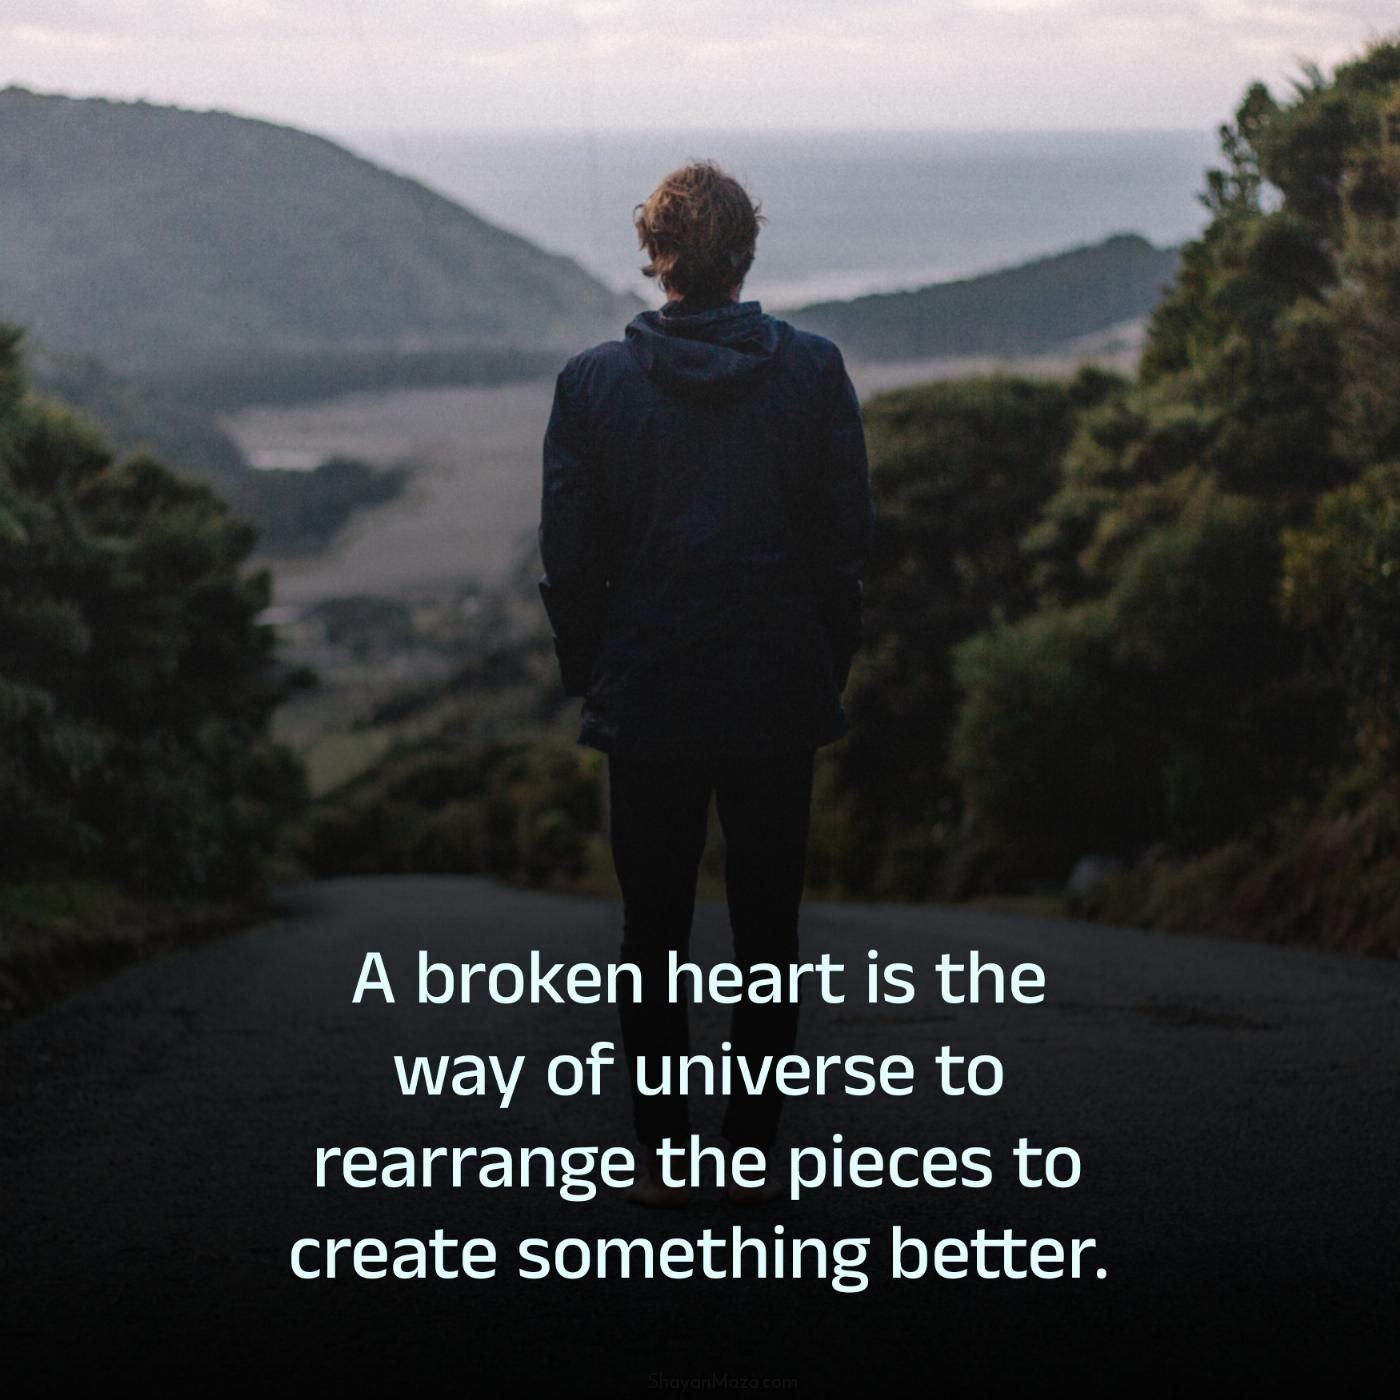 A broken heart is the way of universe to rearrange the pieces